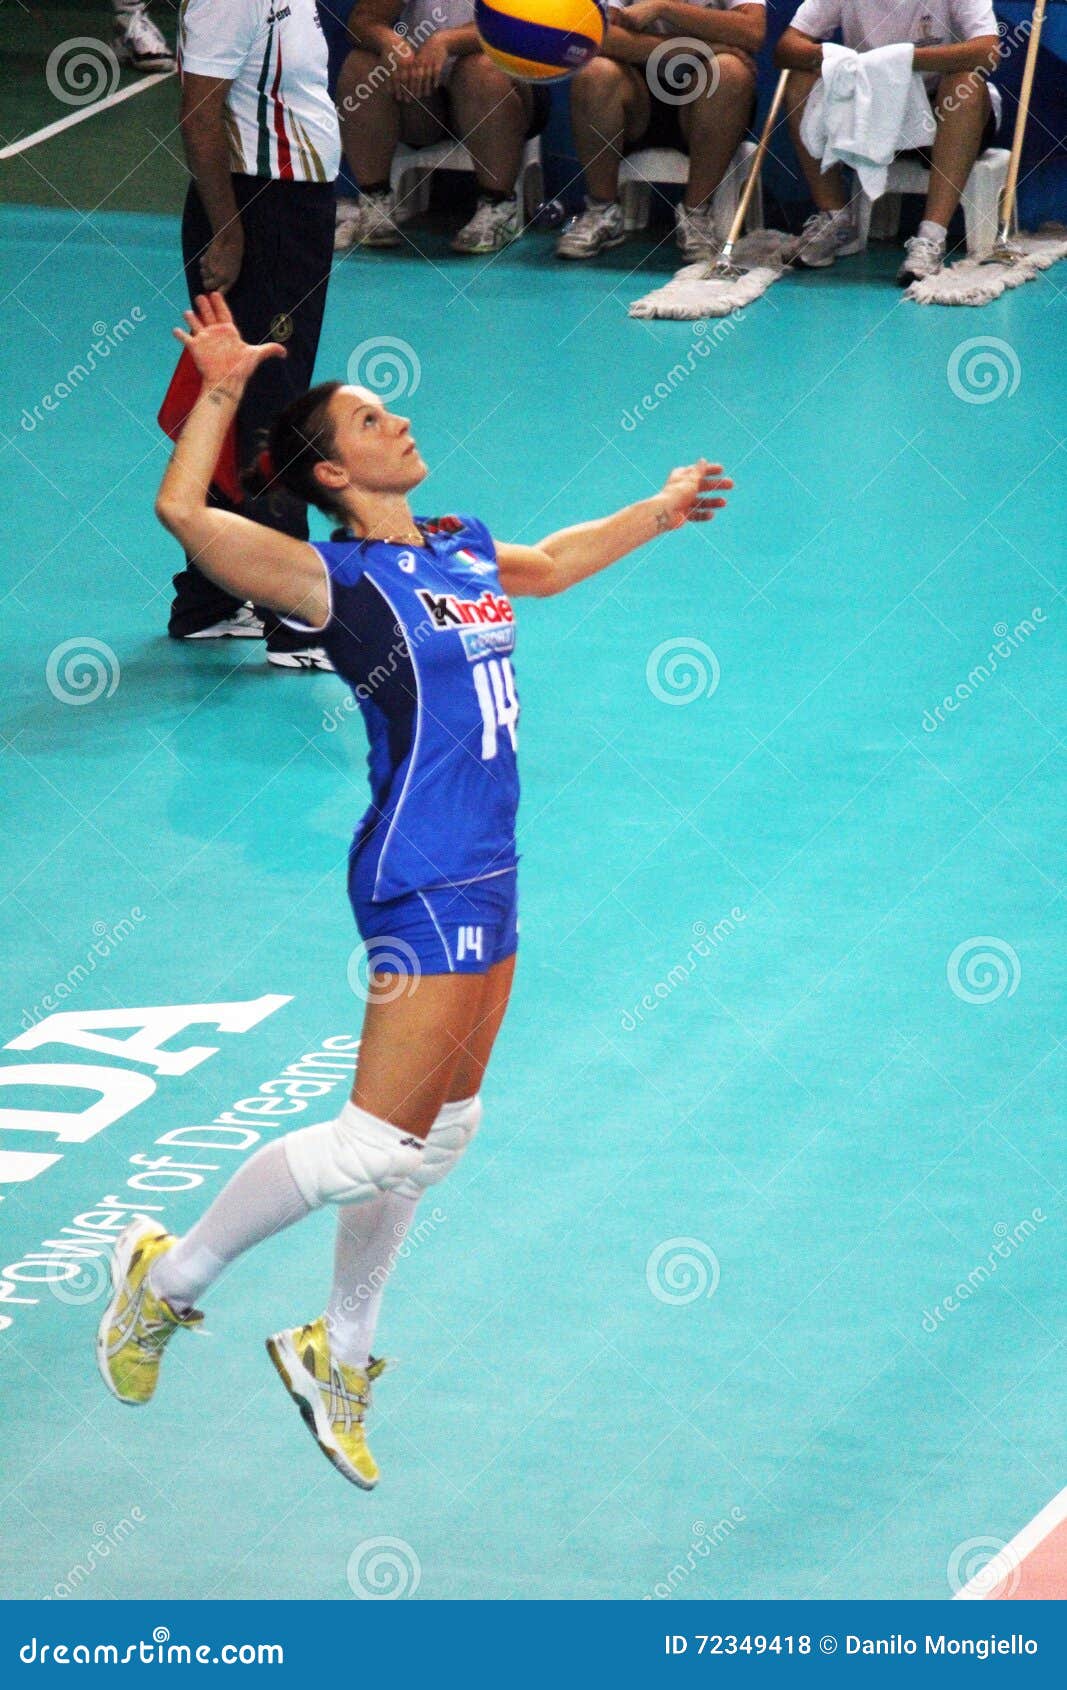 Leo lo bianco editorial stock photo. Image of girl, volley 72349418